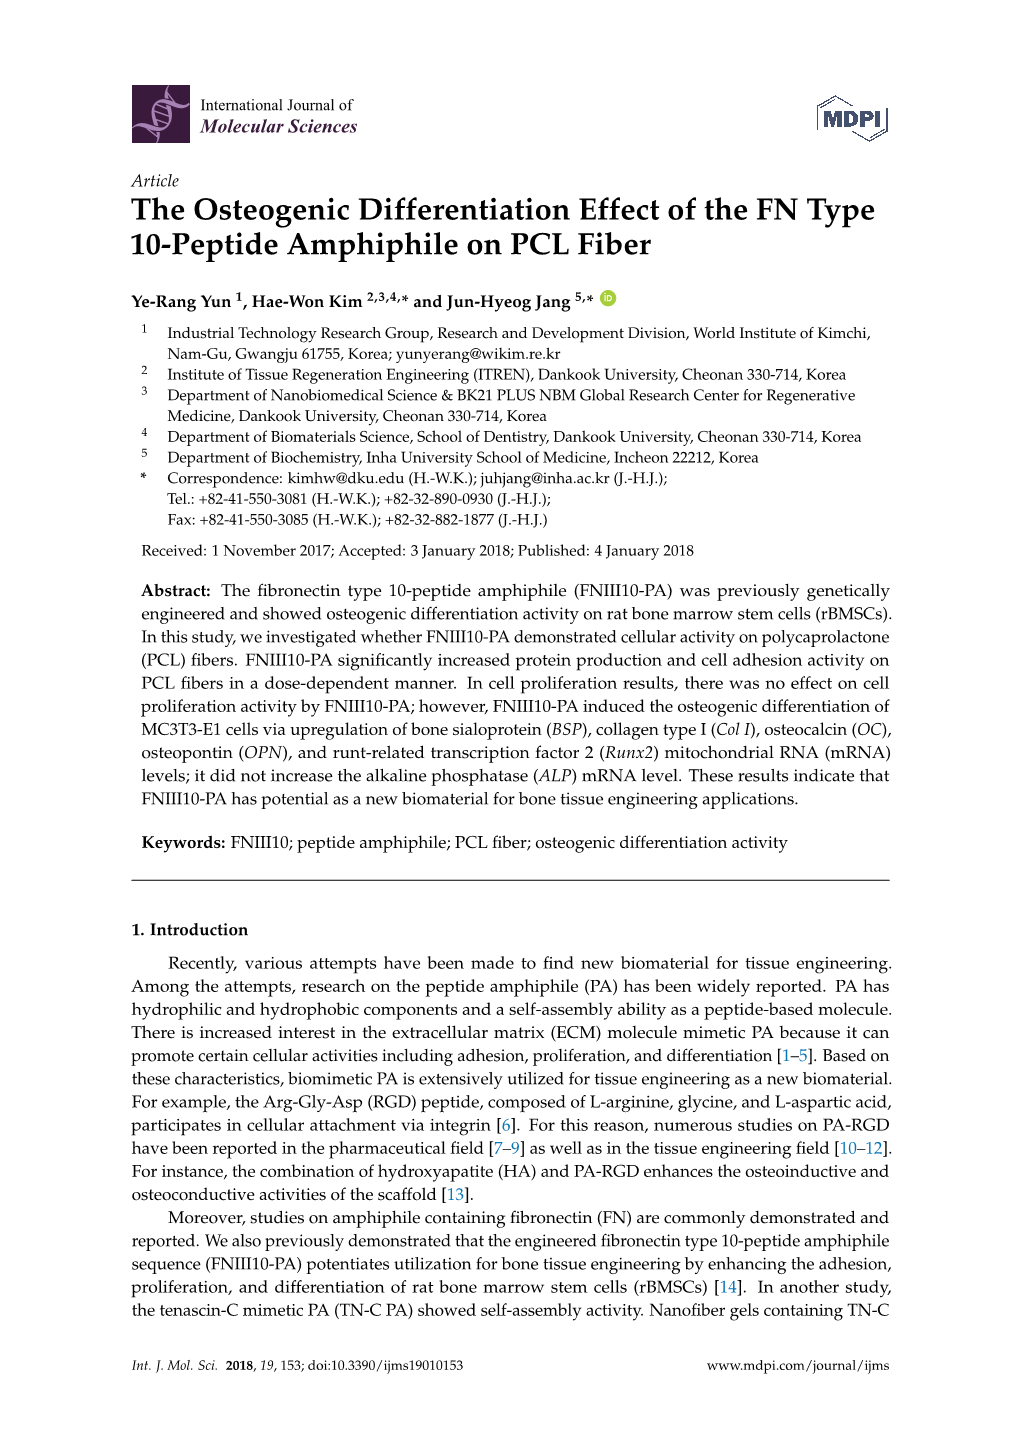 The Osteogenic Differentiation Effect of the FN Type 10-Peptide Amphiphile on PCL Fiber